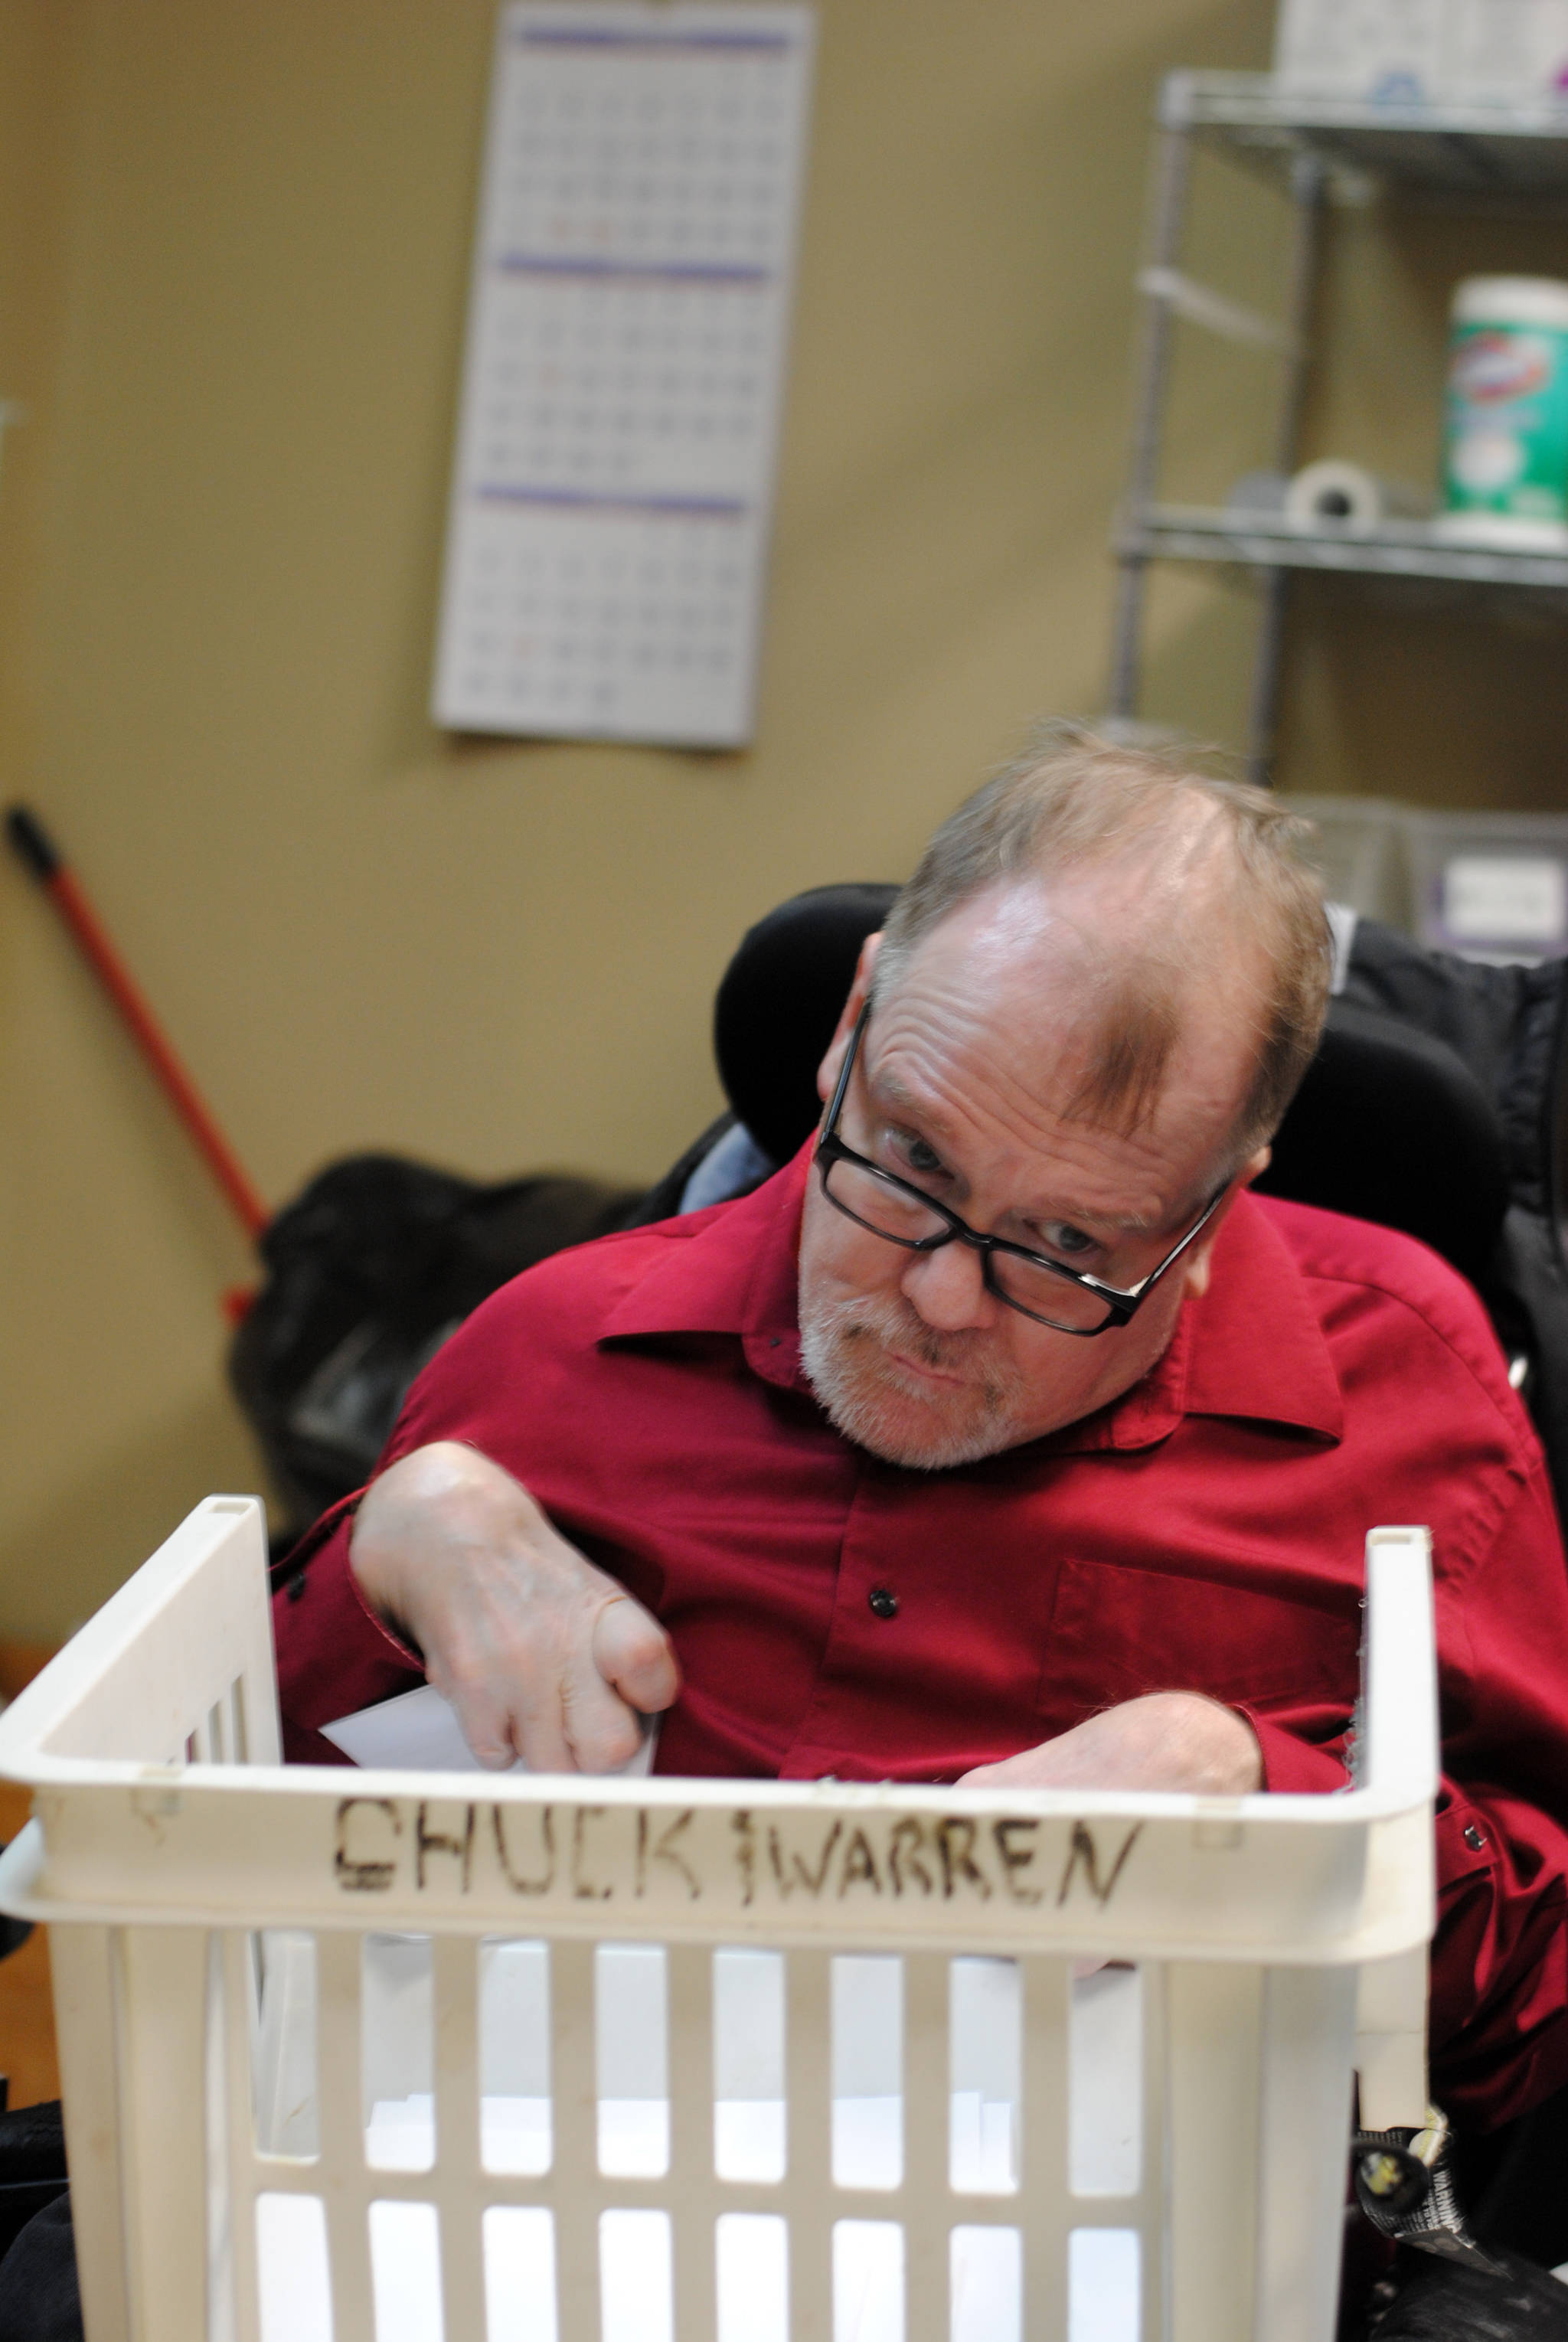 Chuck Davis shreds paper at the Frontier Community Services office in Soldotna on Jan. 18, 2018, his last day of work after 33 years with the non-profit agency. (Photo by Kat Sorensen/Peninsula Clarion)